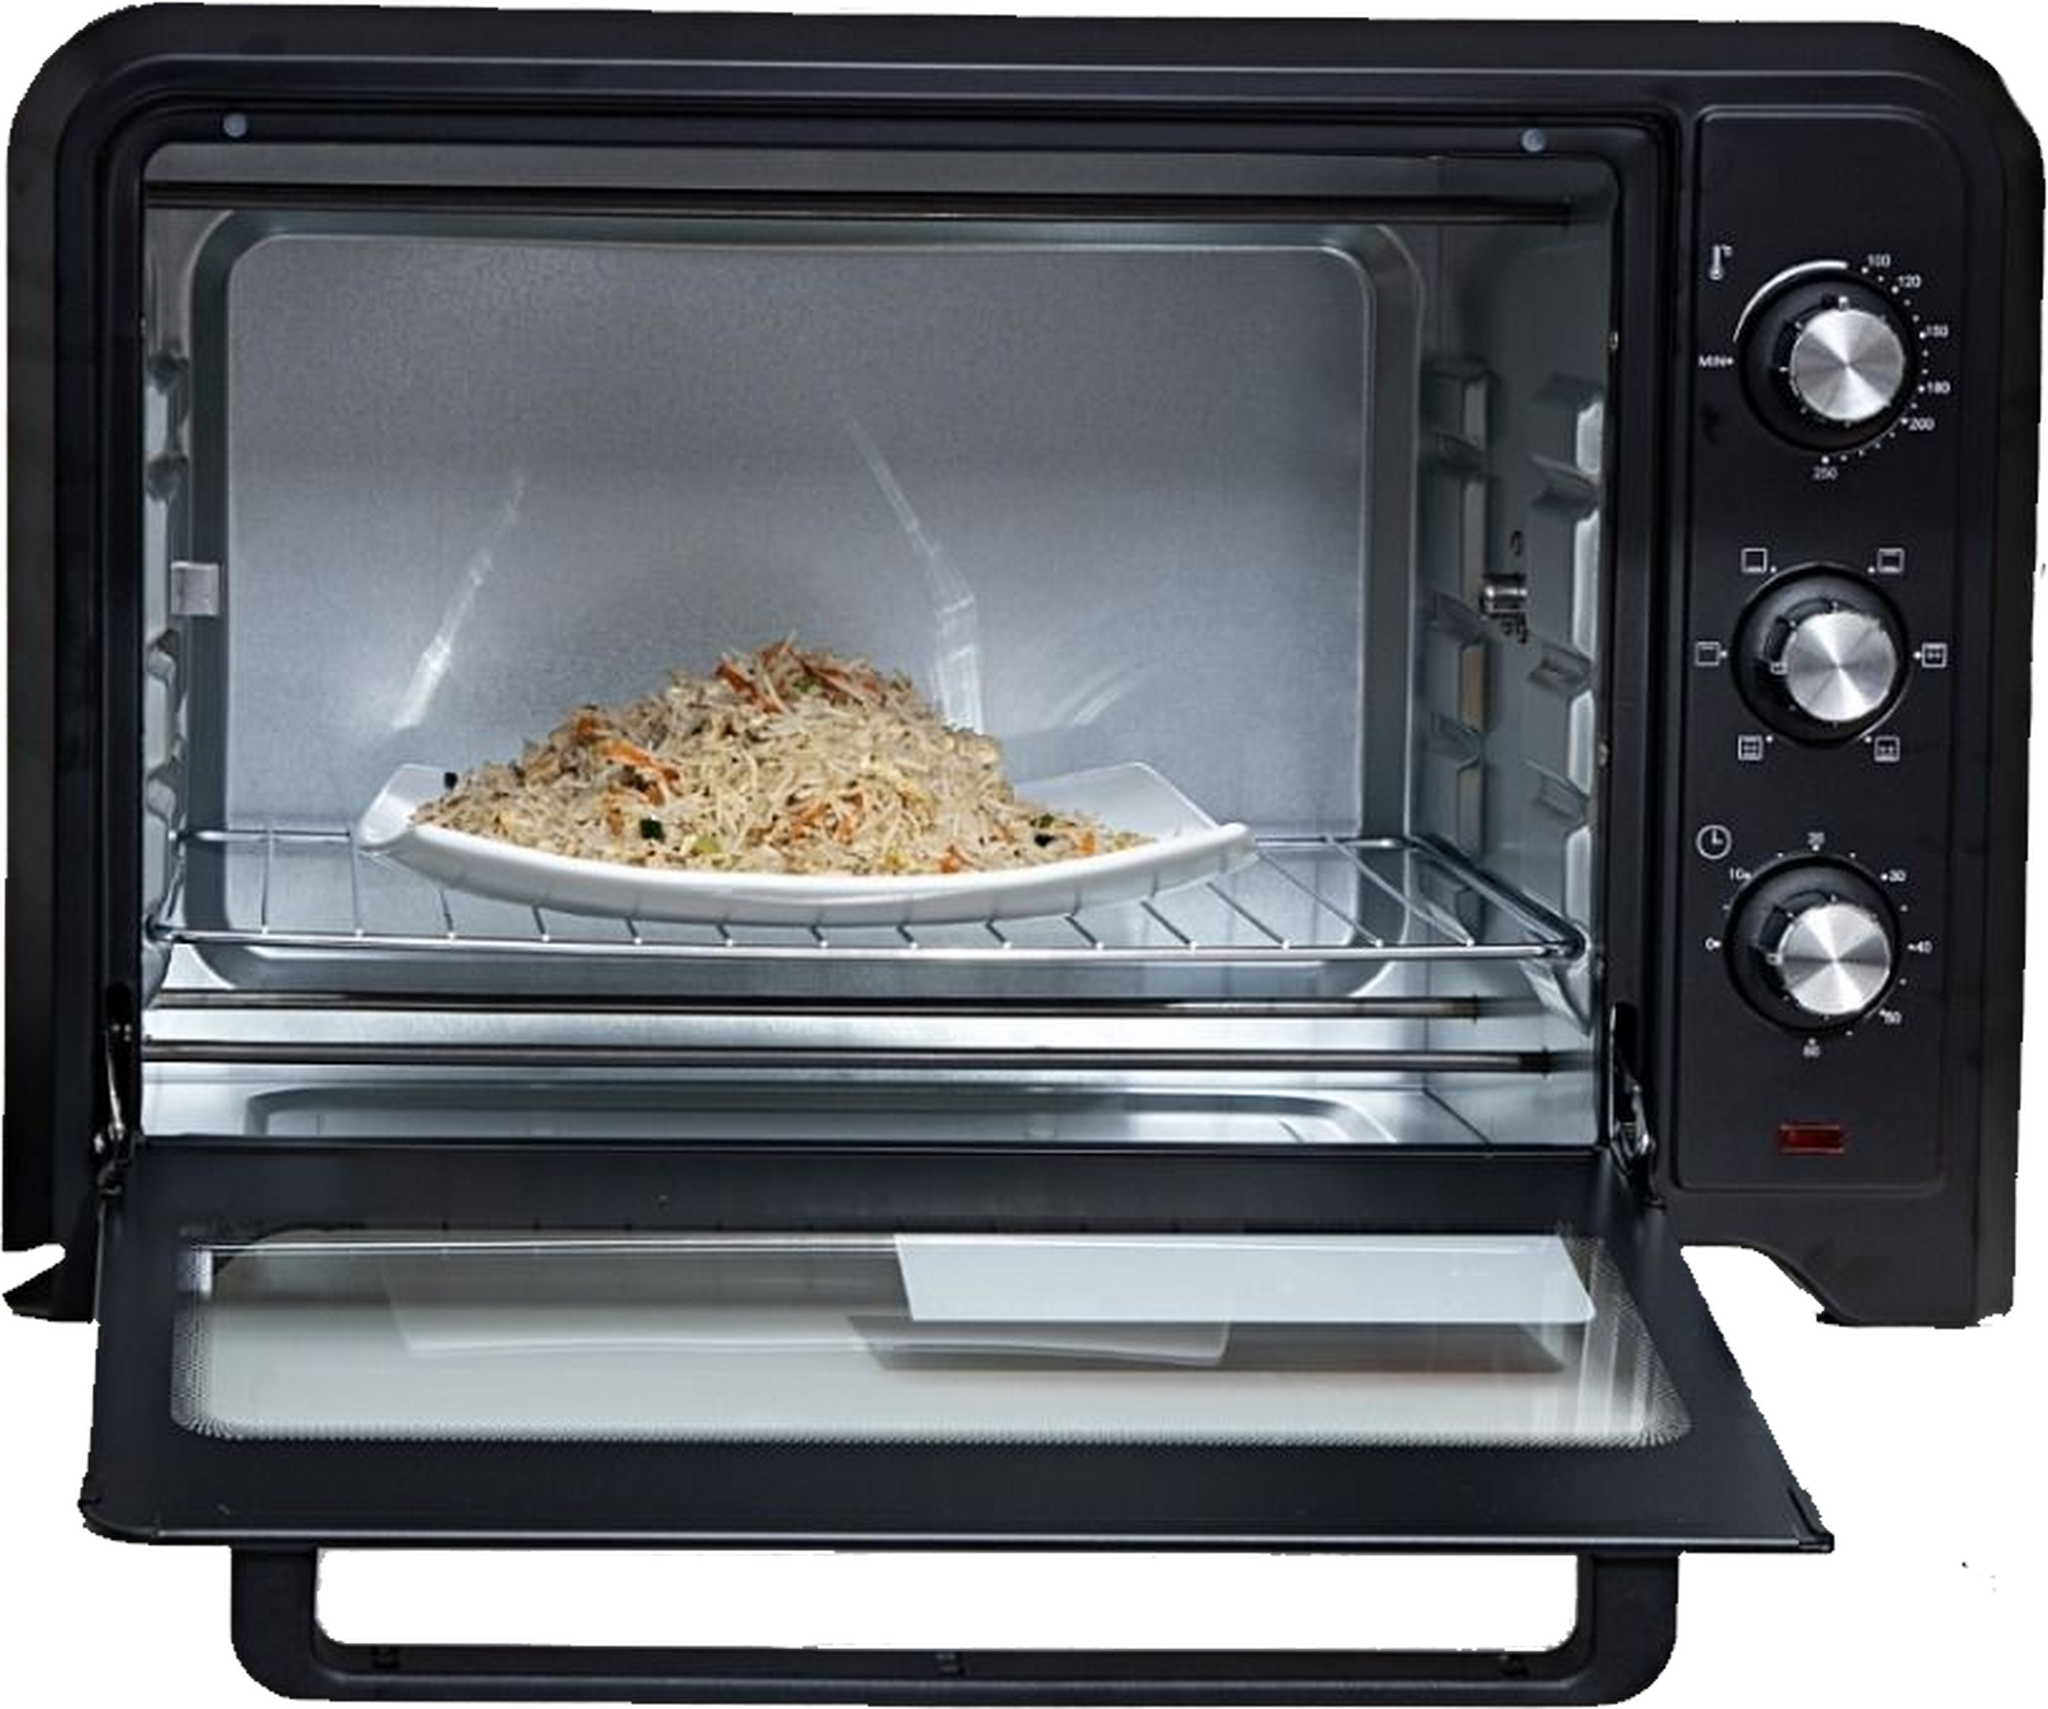 Geepas 1500W 42L Electric Oven - Black (GO4450)